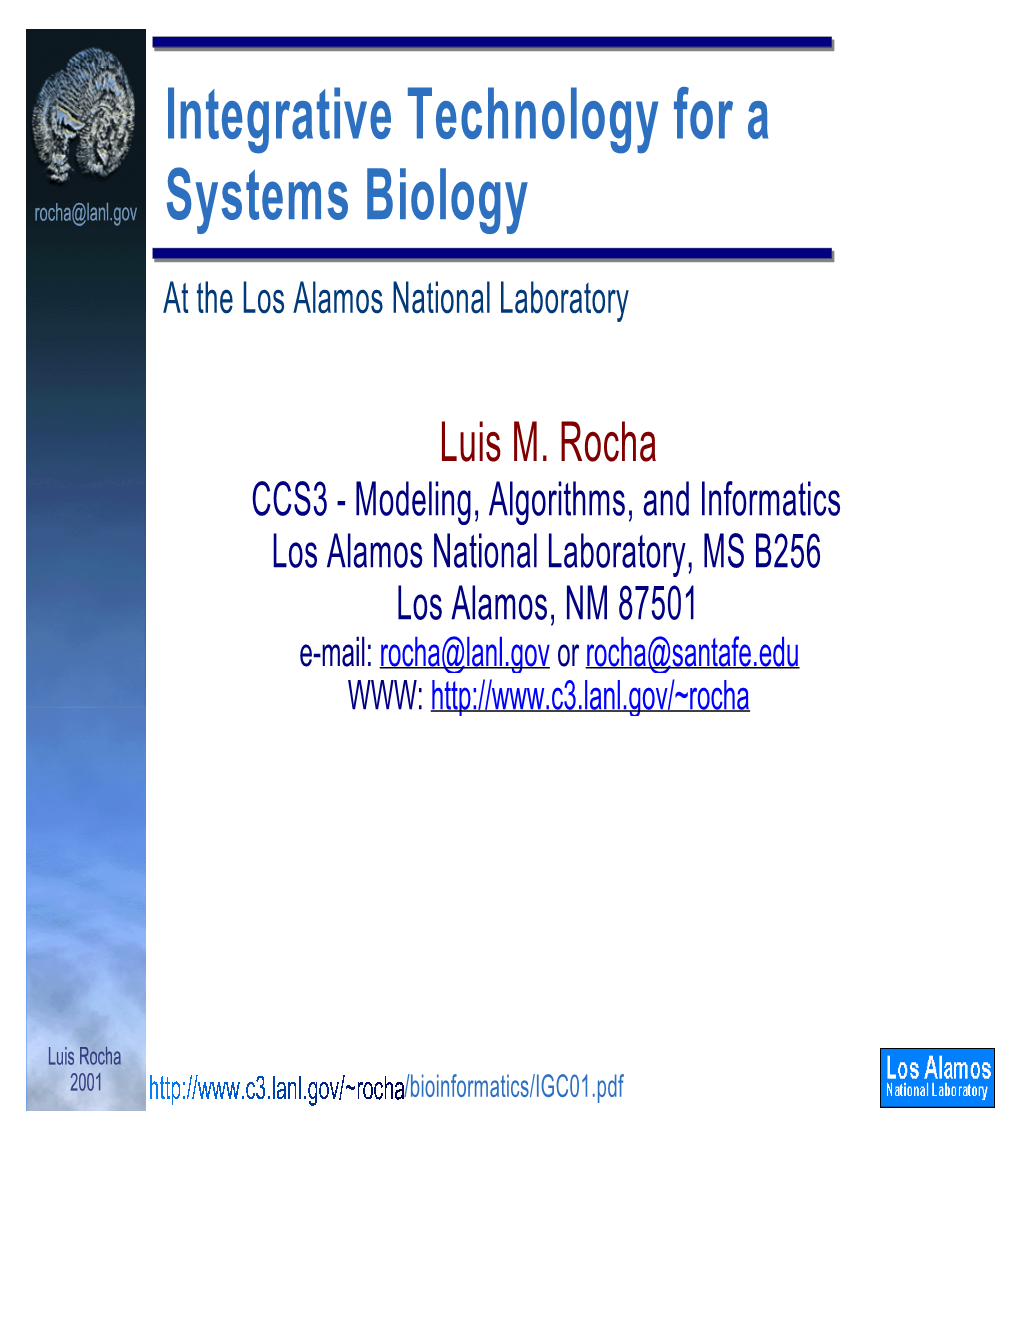 Integrative Technology for a Systems Biology